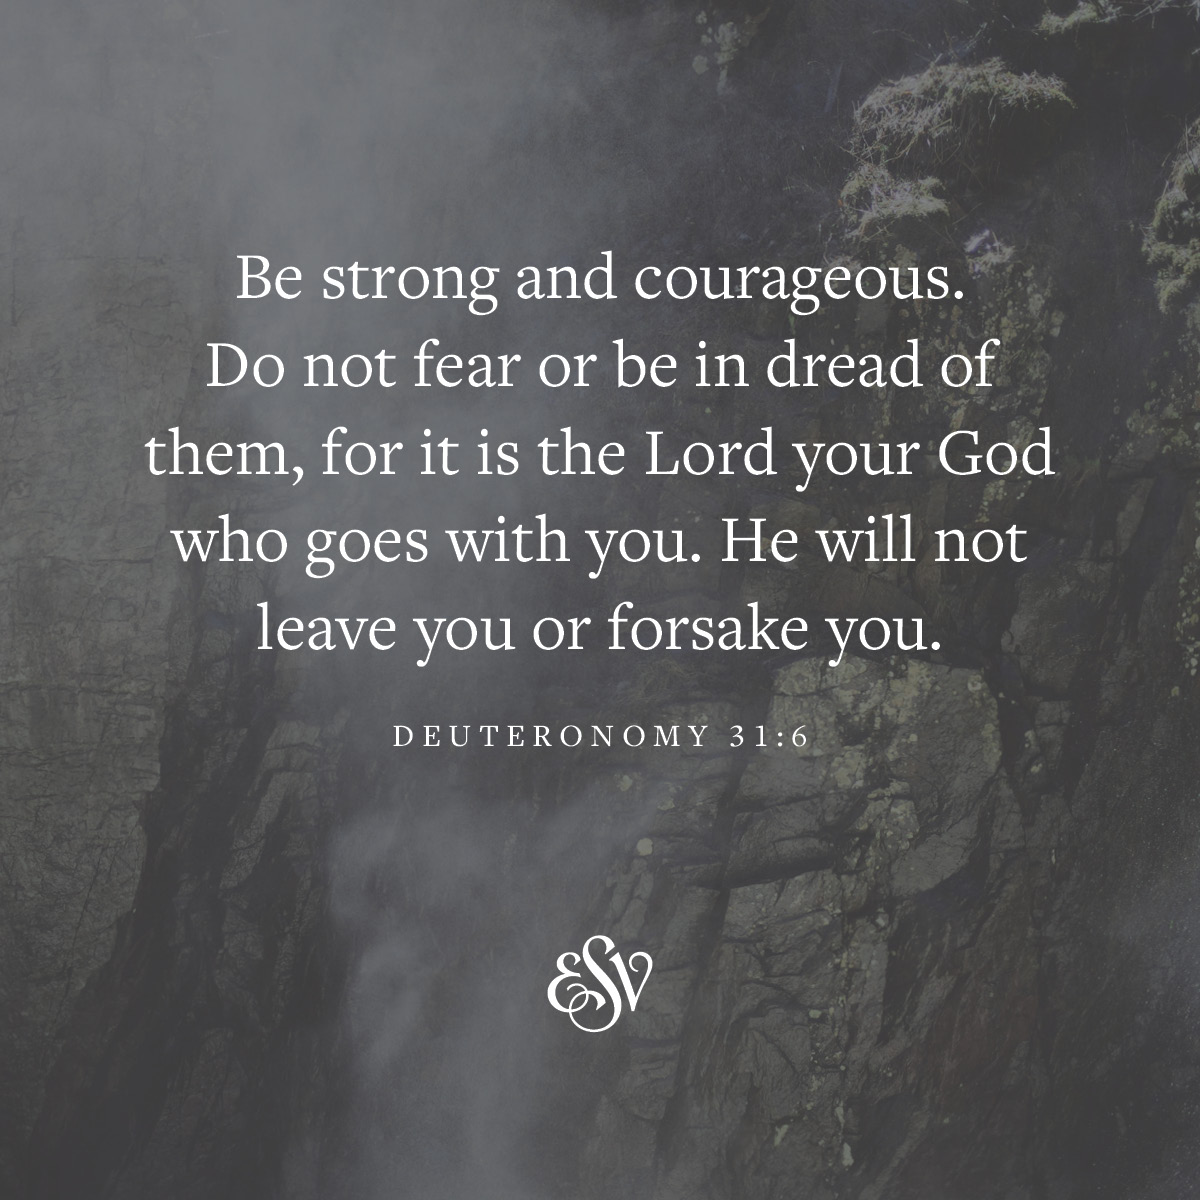 Be strong and courageous. Do not fear or be in dread of them, for it is the Lord your God who goes with you. He will not leave you or forsake you. 
—Deuteronomy 31:6 ESV.org

#Verseoftheday #ESV #Scripturememoryverse #Bible